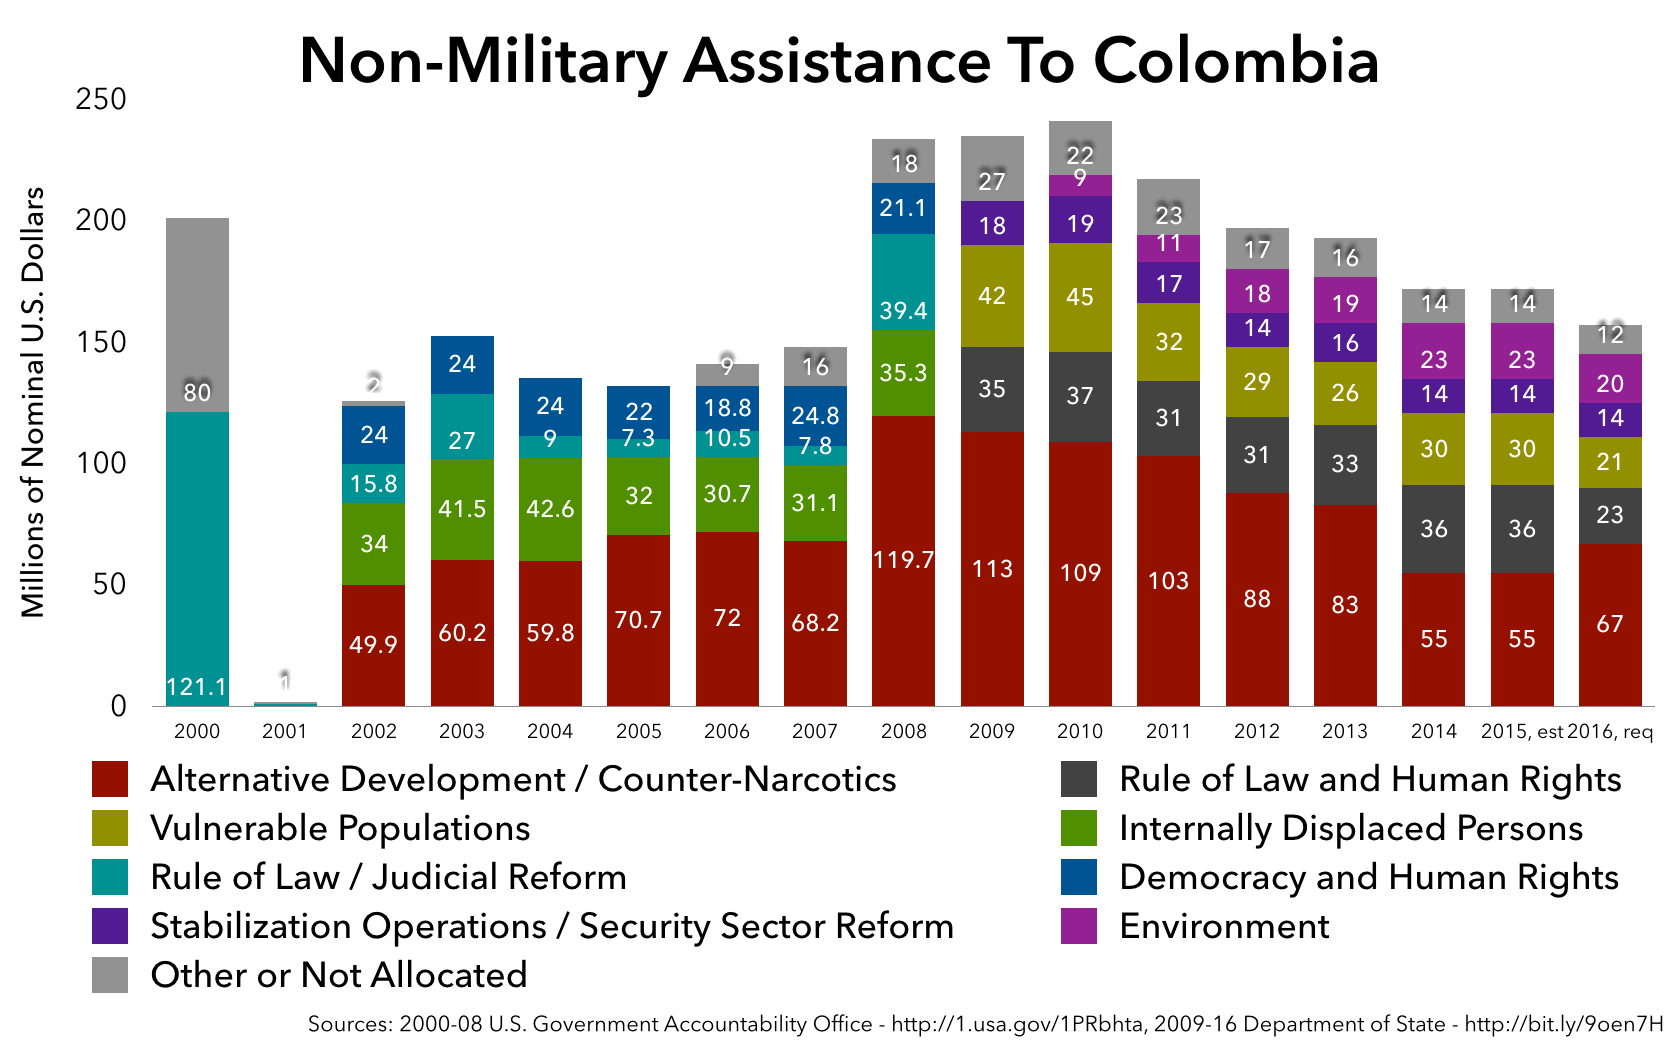 A chart showing the 2000-2016 evolution of Plan Colombia's development, humanitarian, and civilian institution-building initiatives, by category